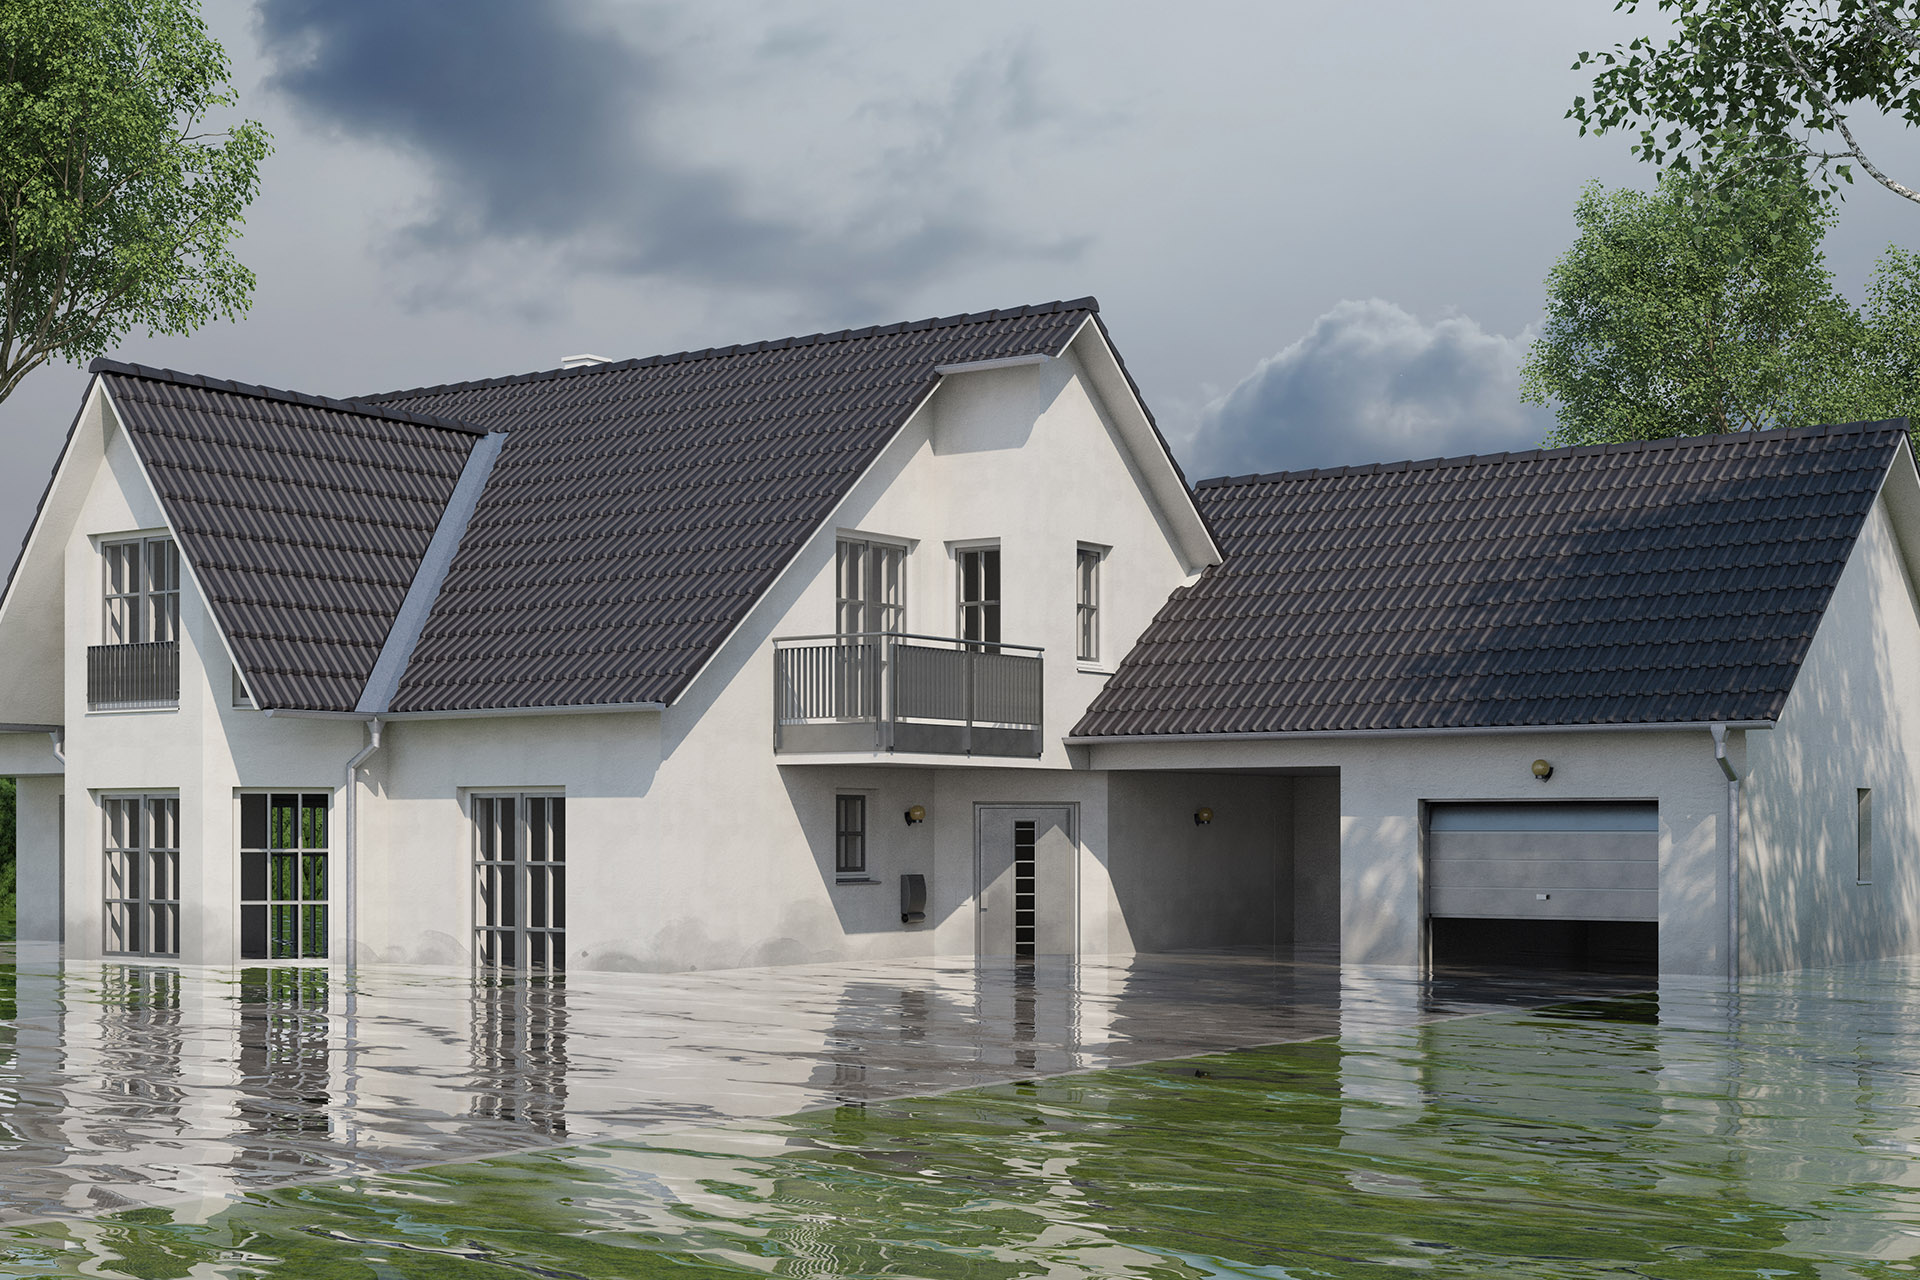 Flood Insurance Definition Issues Involving Commonly Misused Language Concerns